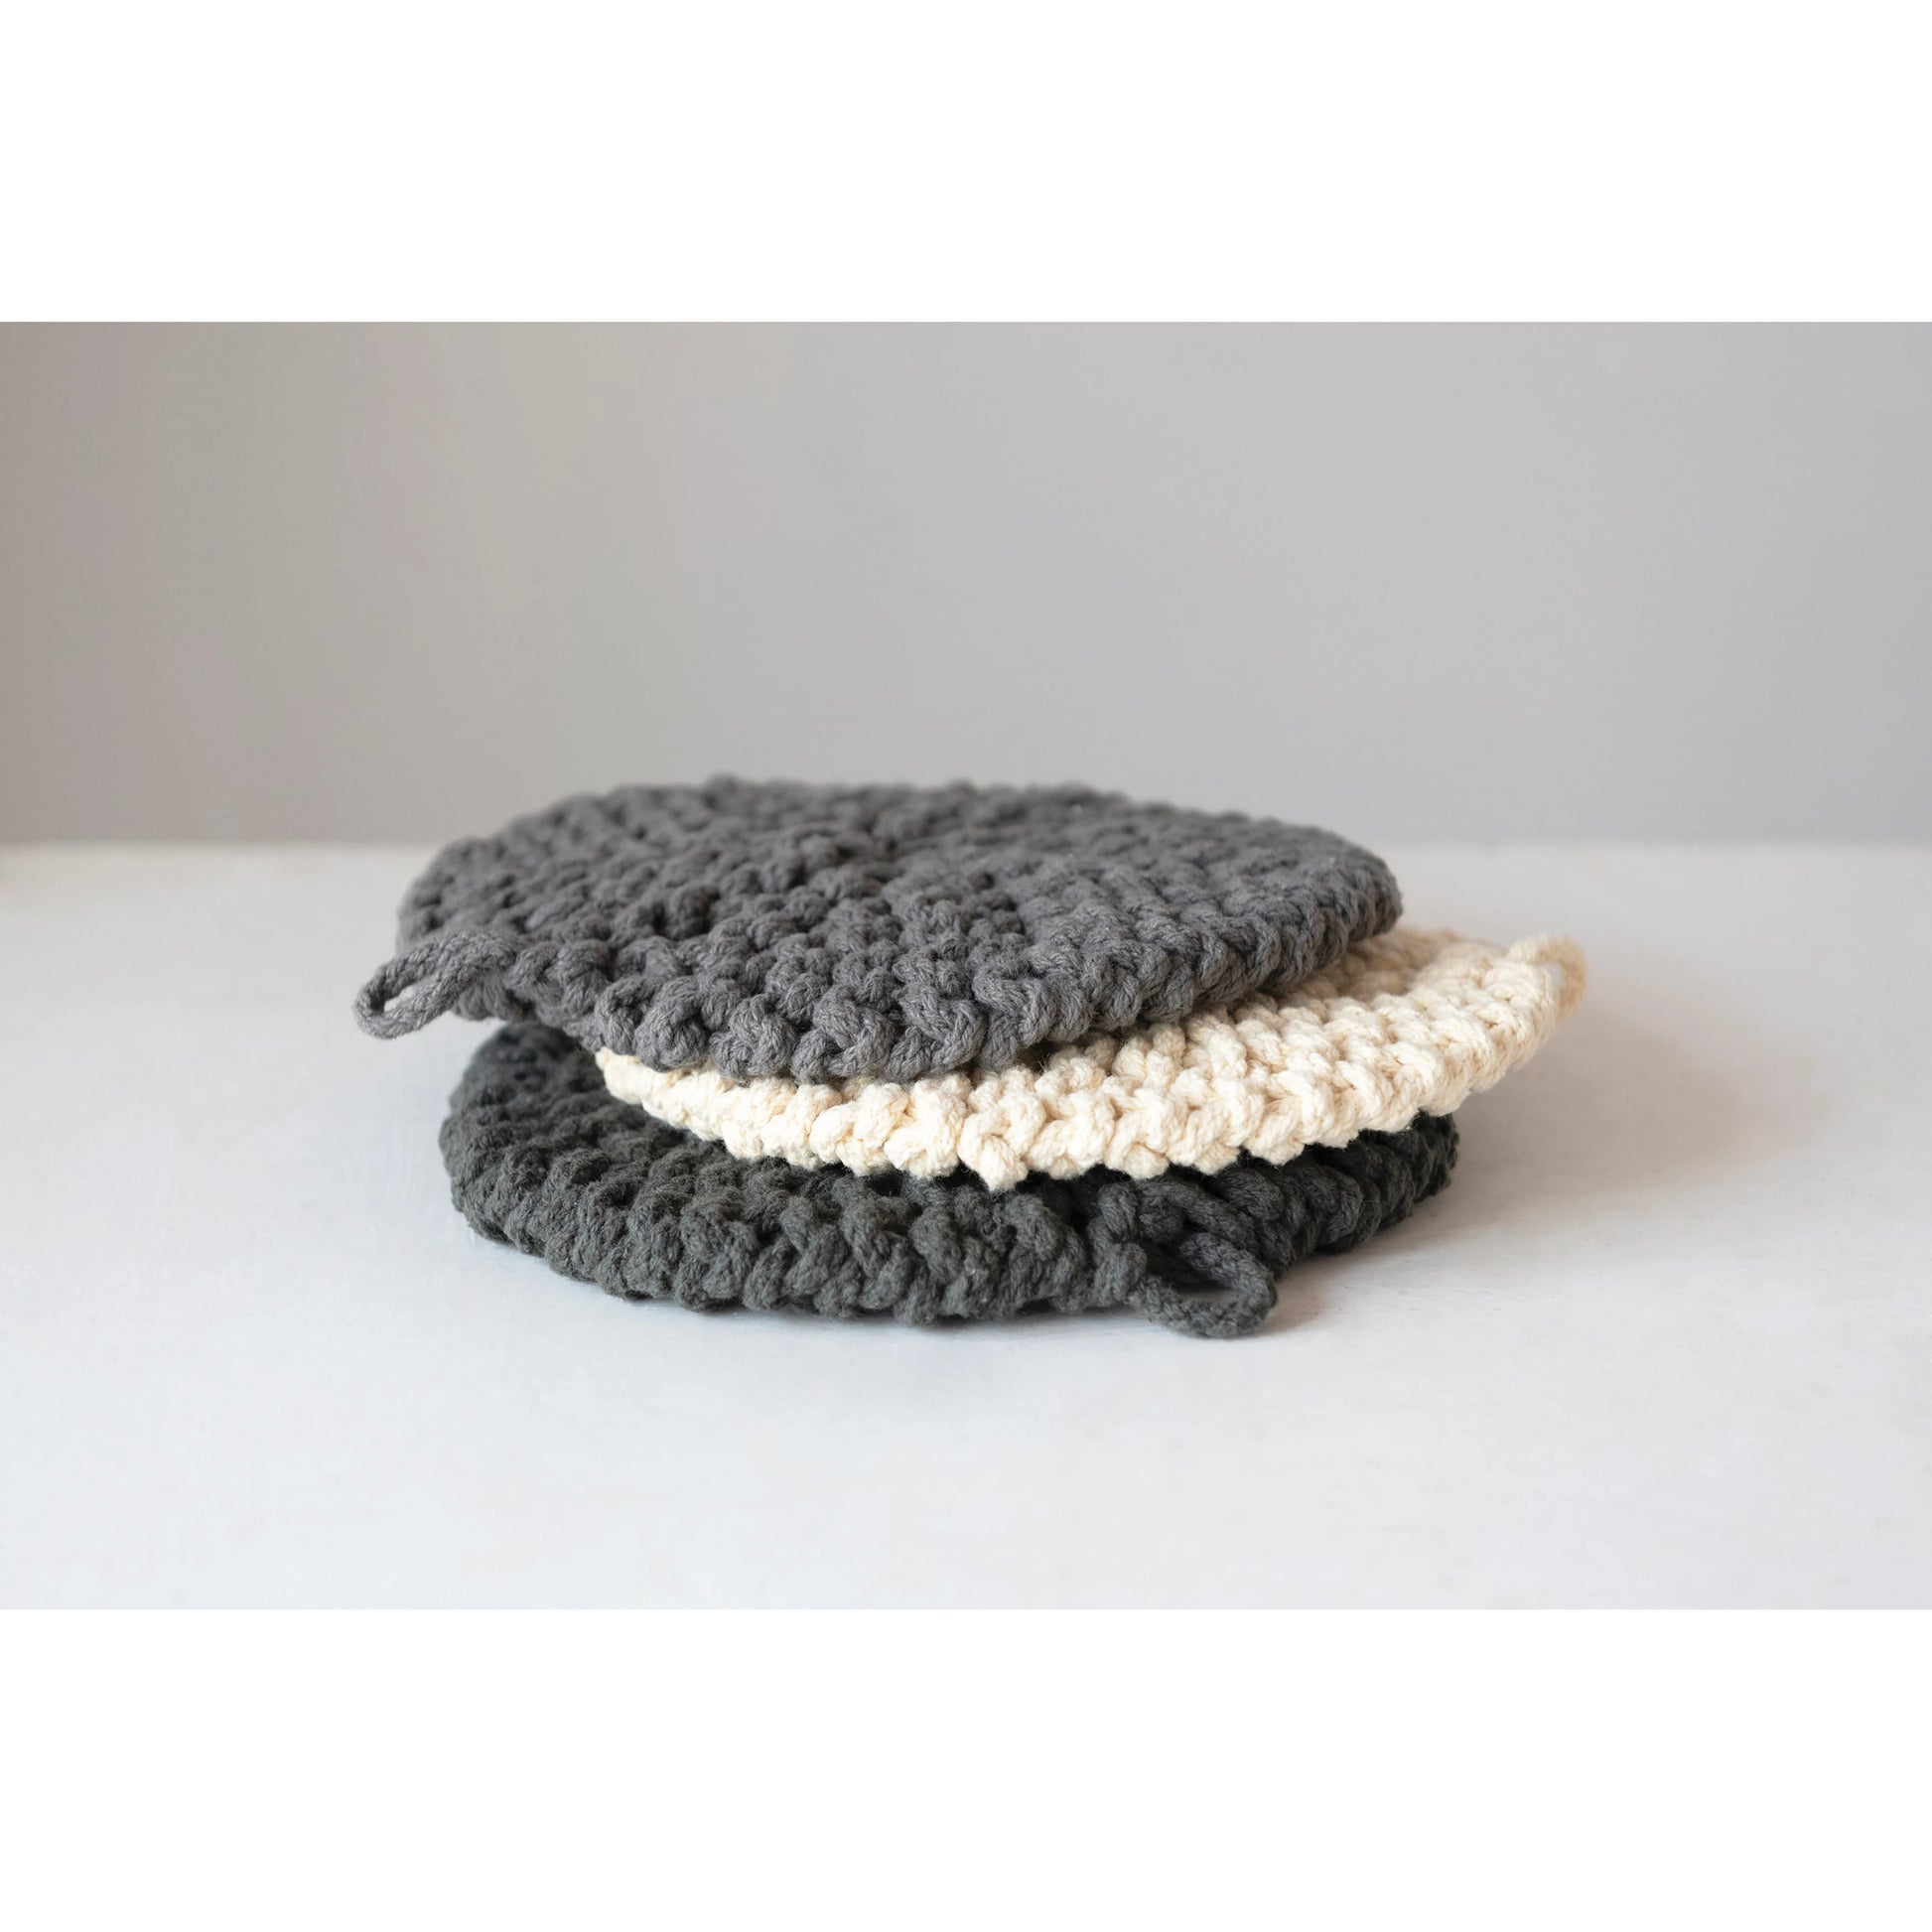  Round Crocheted Pot Holders, The Feathered Farmhouse